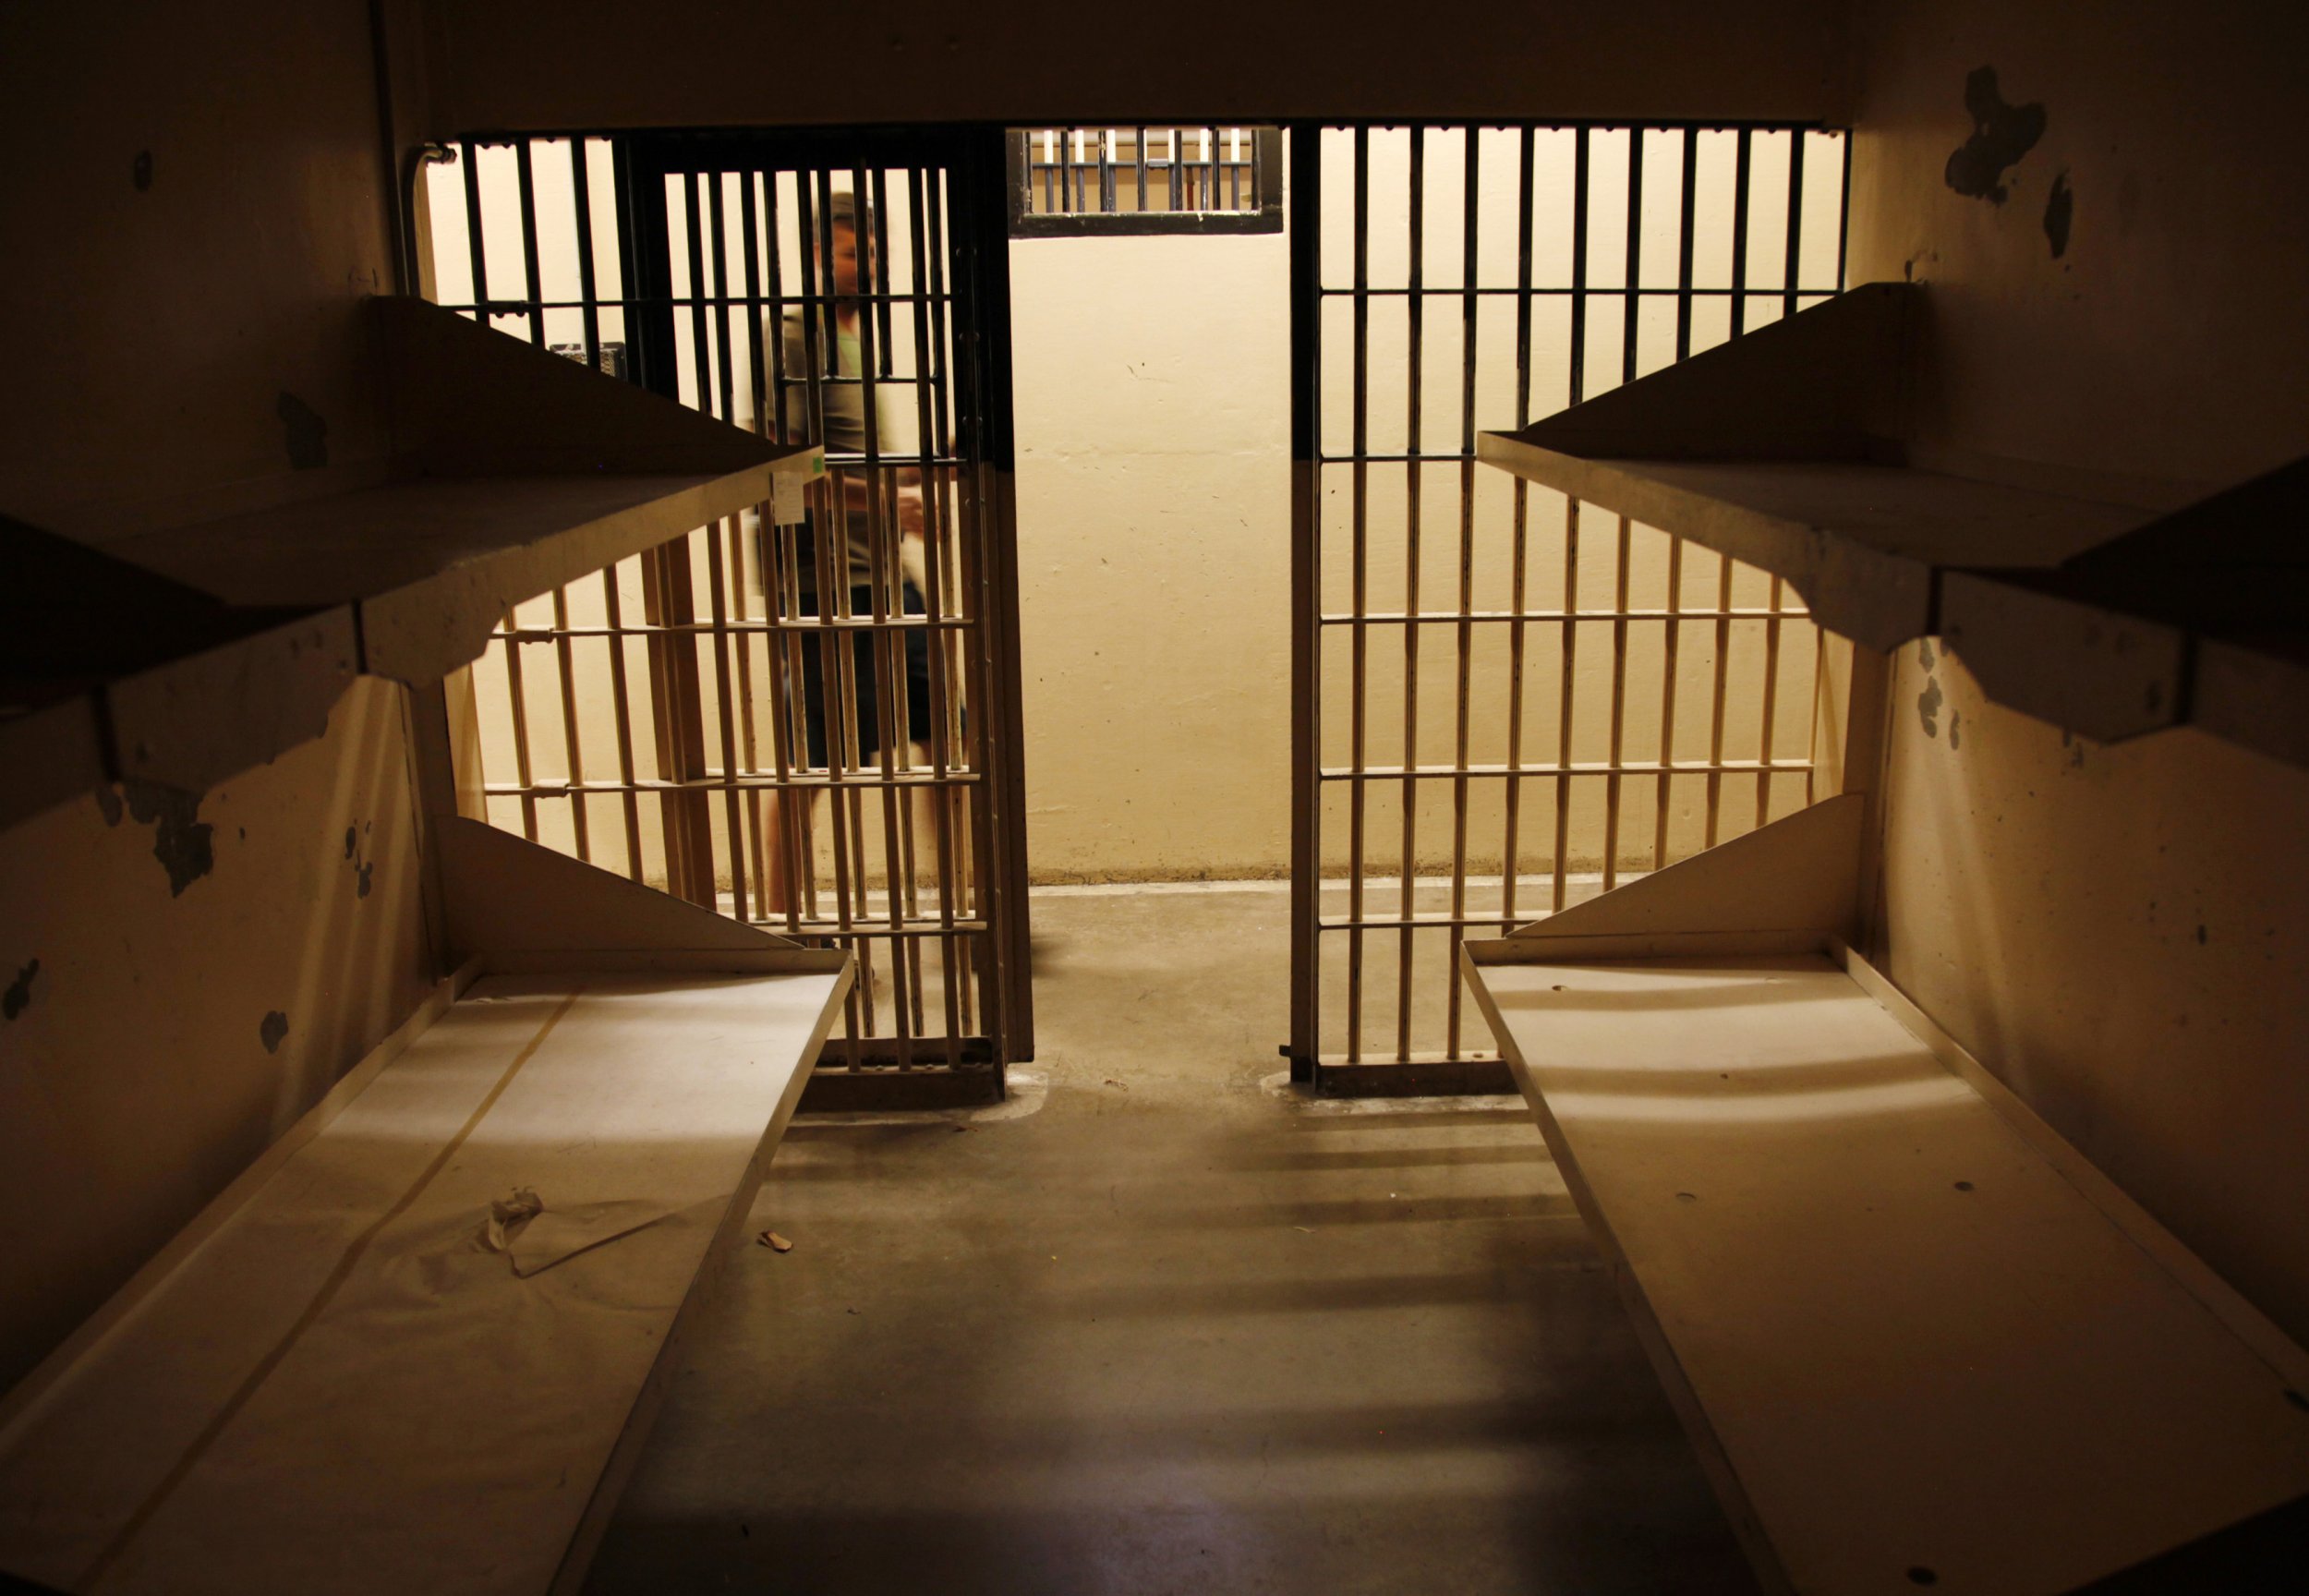 A cell at the old Jefferson County jailhouse in Golden, Colorado, on July 1...